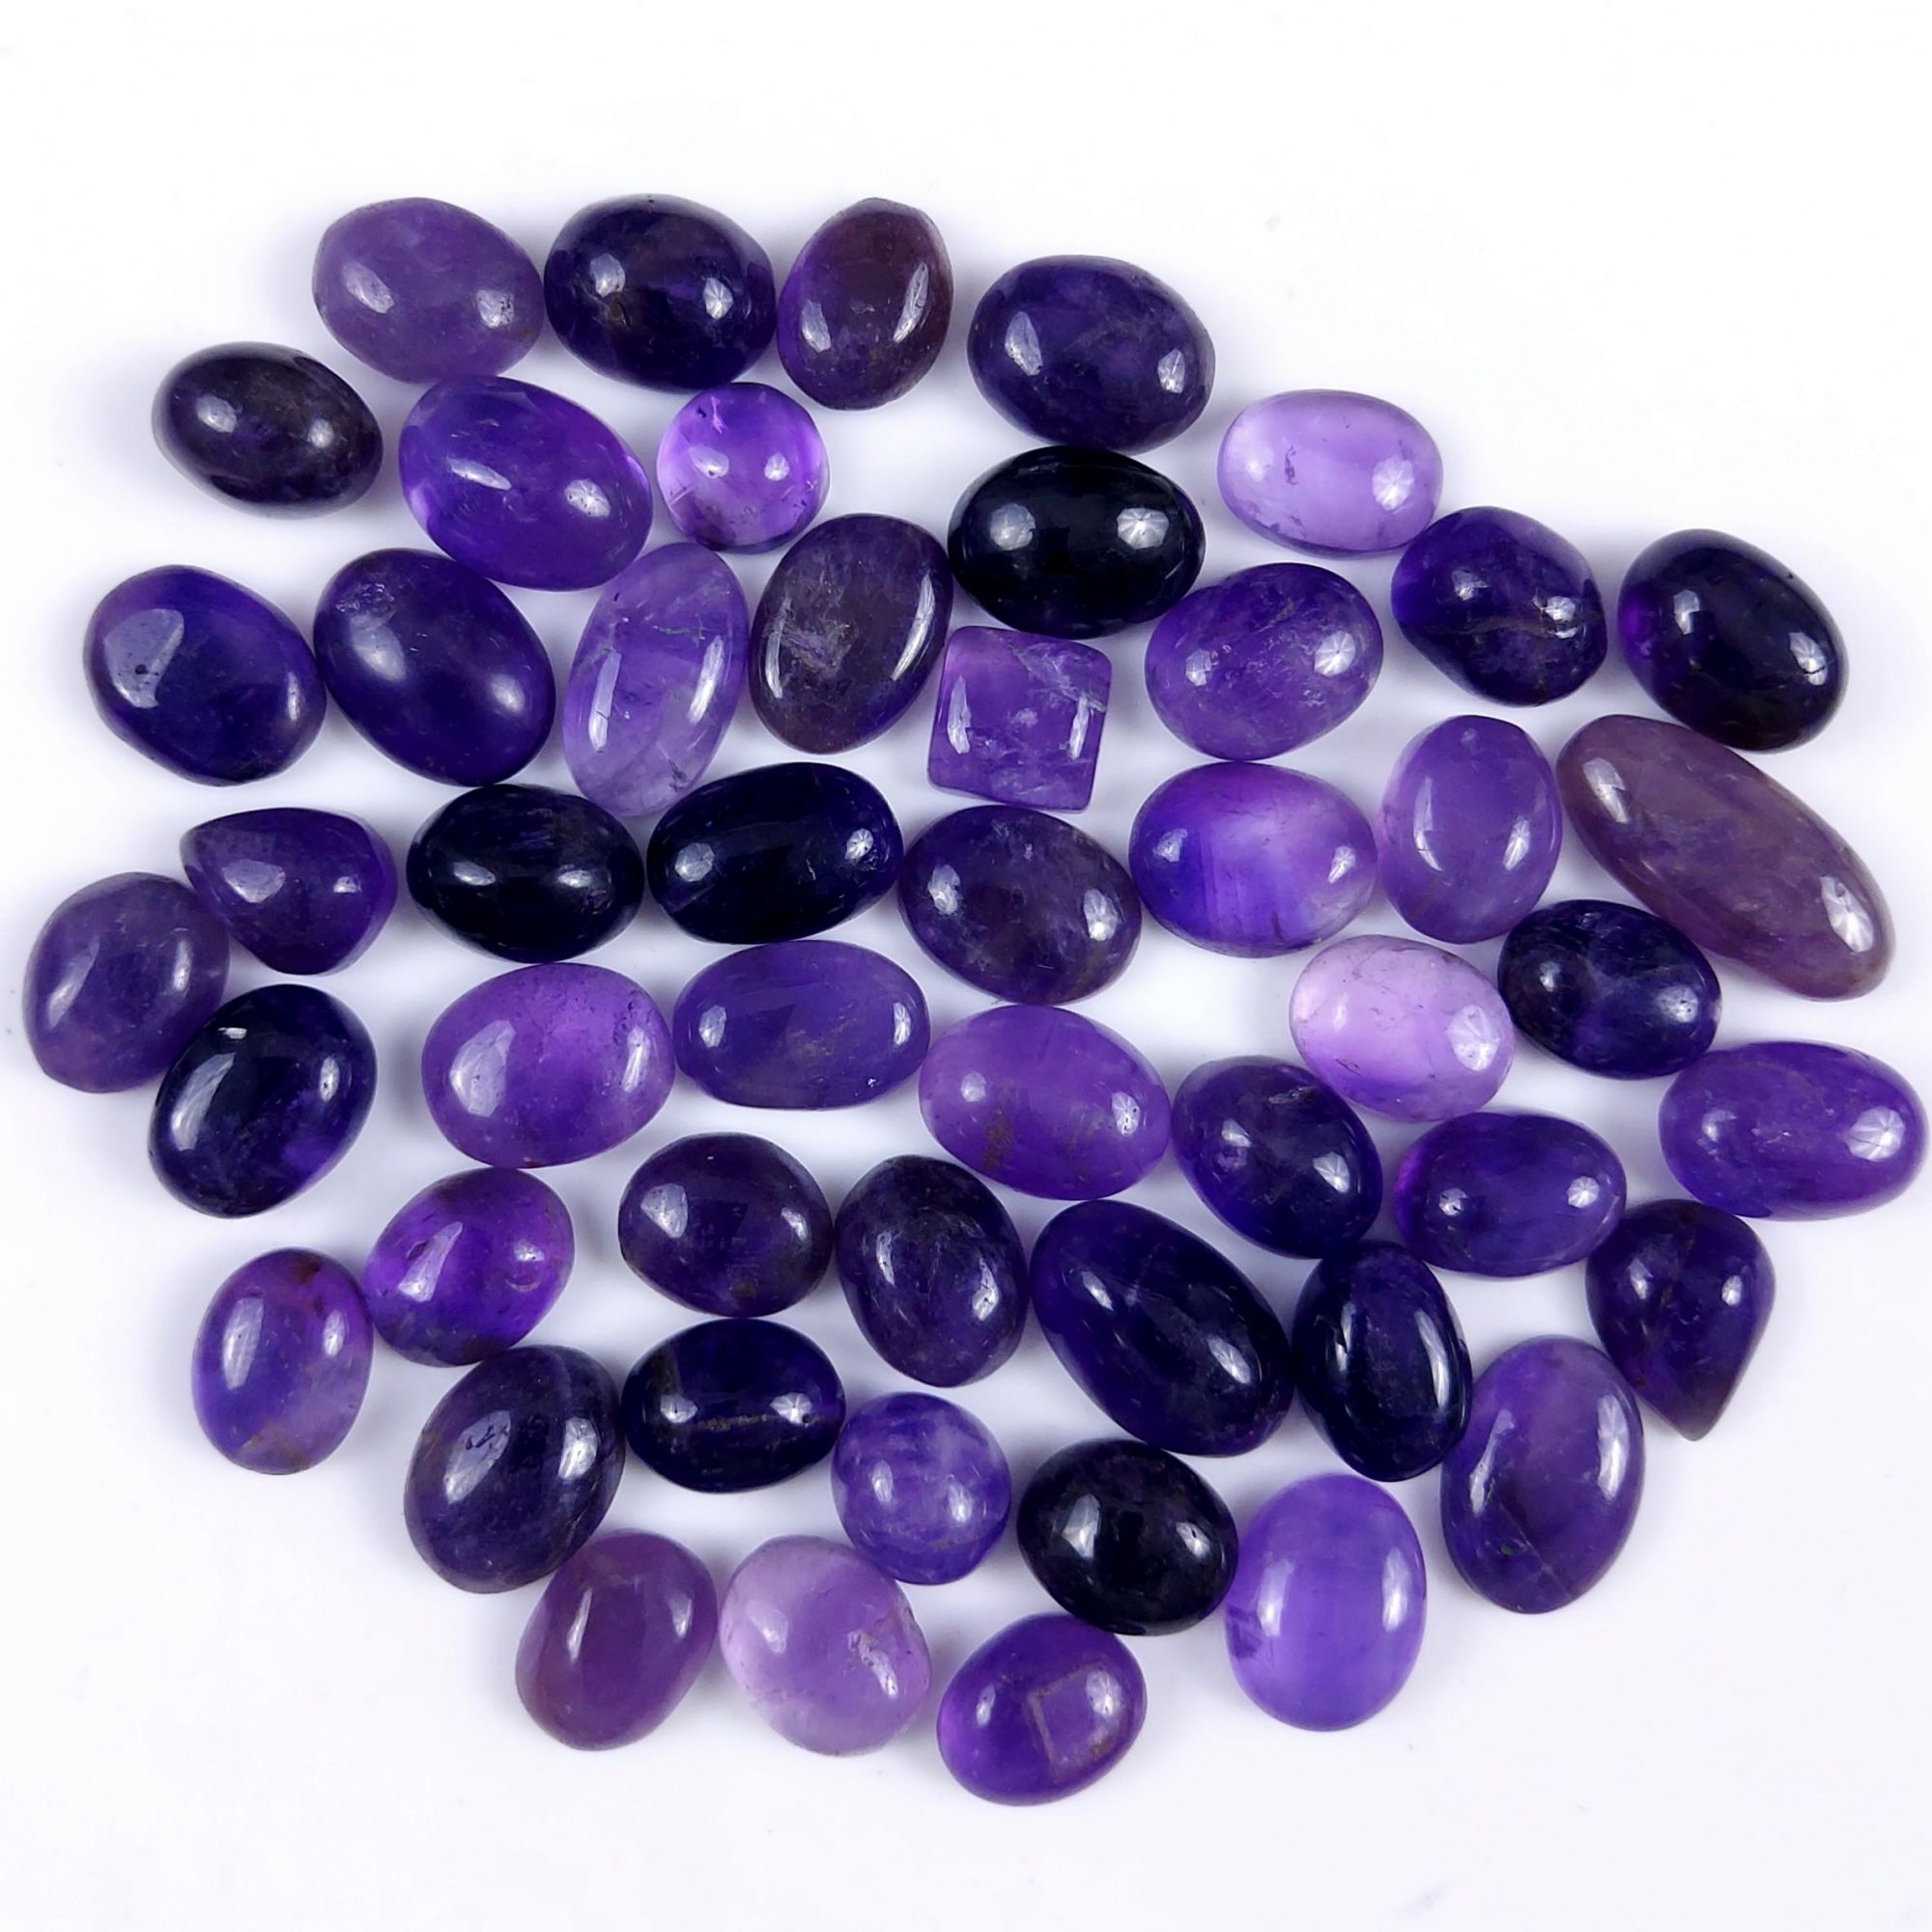 50Pcs Lot 377Cts Natural Purple Amethyst Mix Shape Cabochon Lot  Loose Gemstones Crystal For Jewelry Making  20x8 10x7mm#G-253